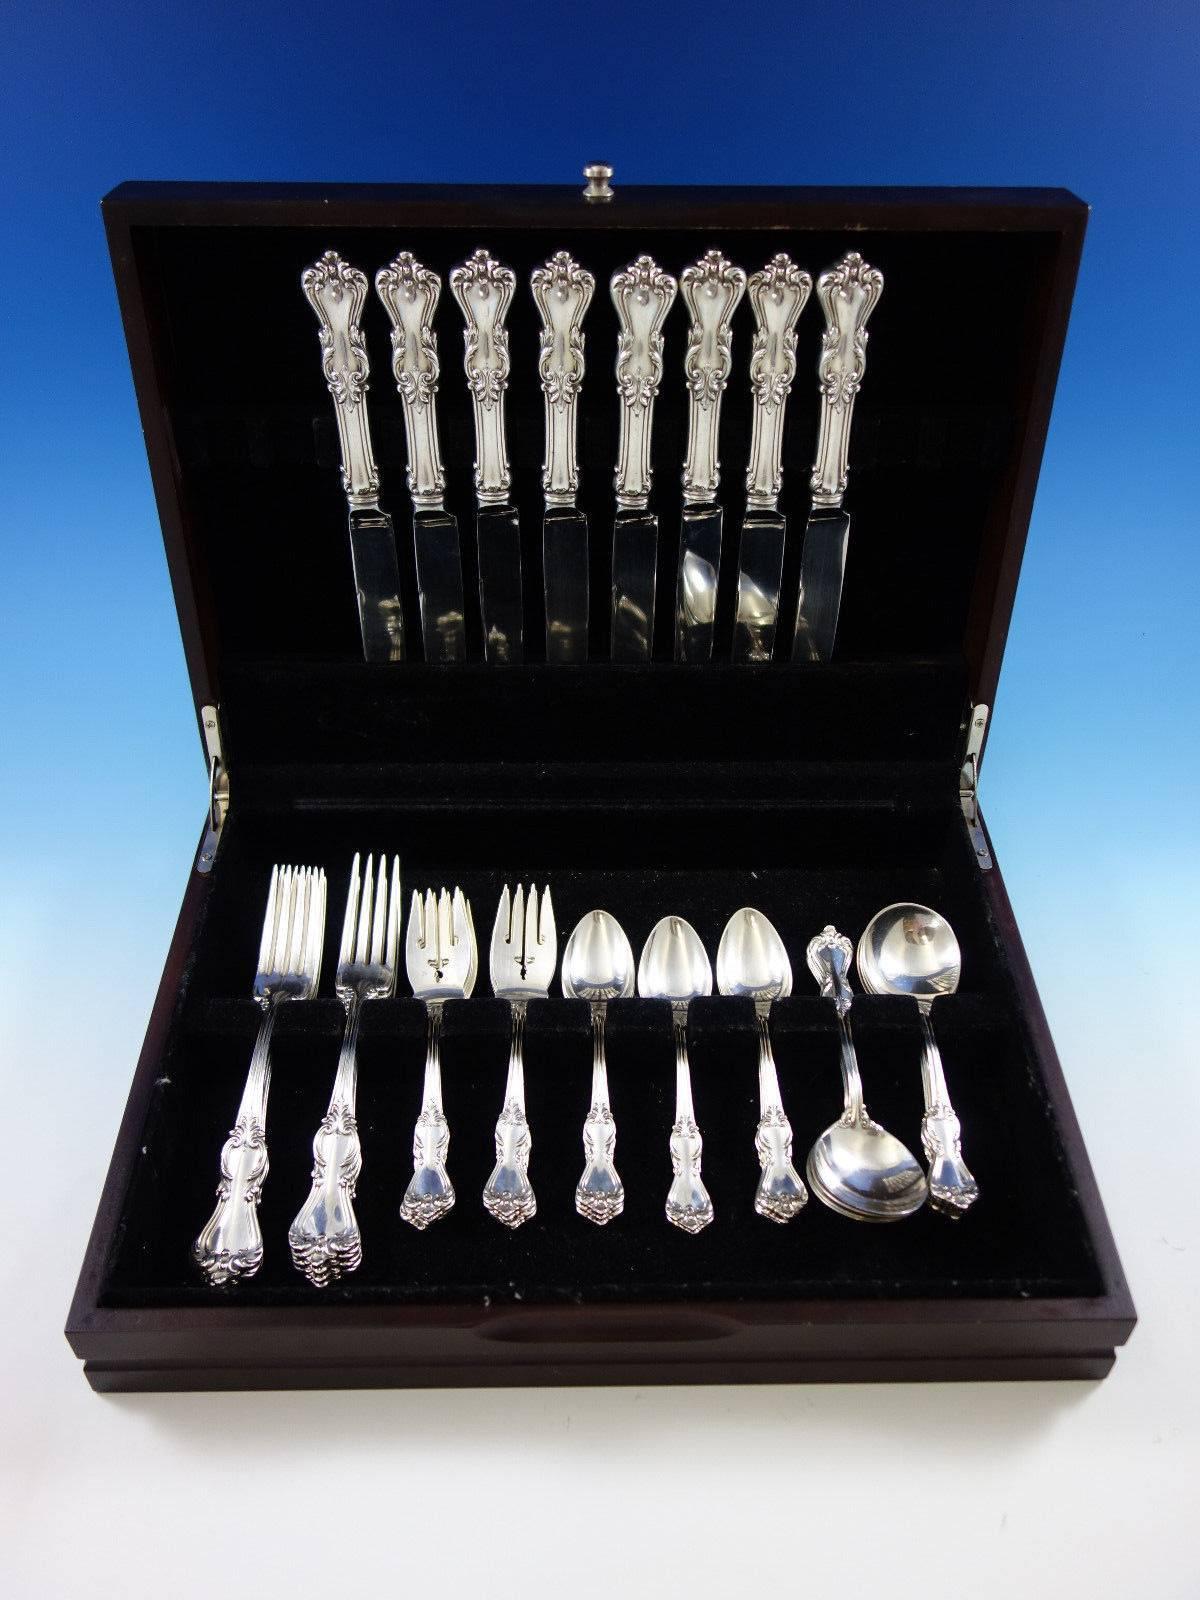 Marlborough by Reed and Barton sterling silver flatware set - 40 pieces. This set includes: 

Eight dinner size knives, 9 3/4